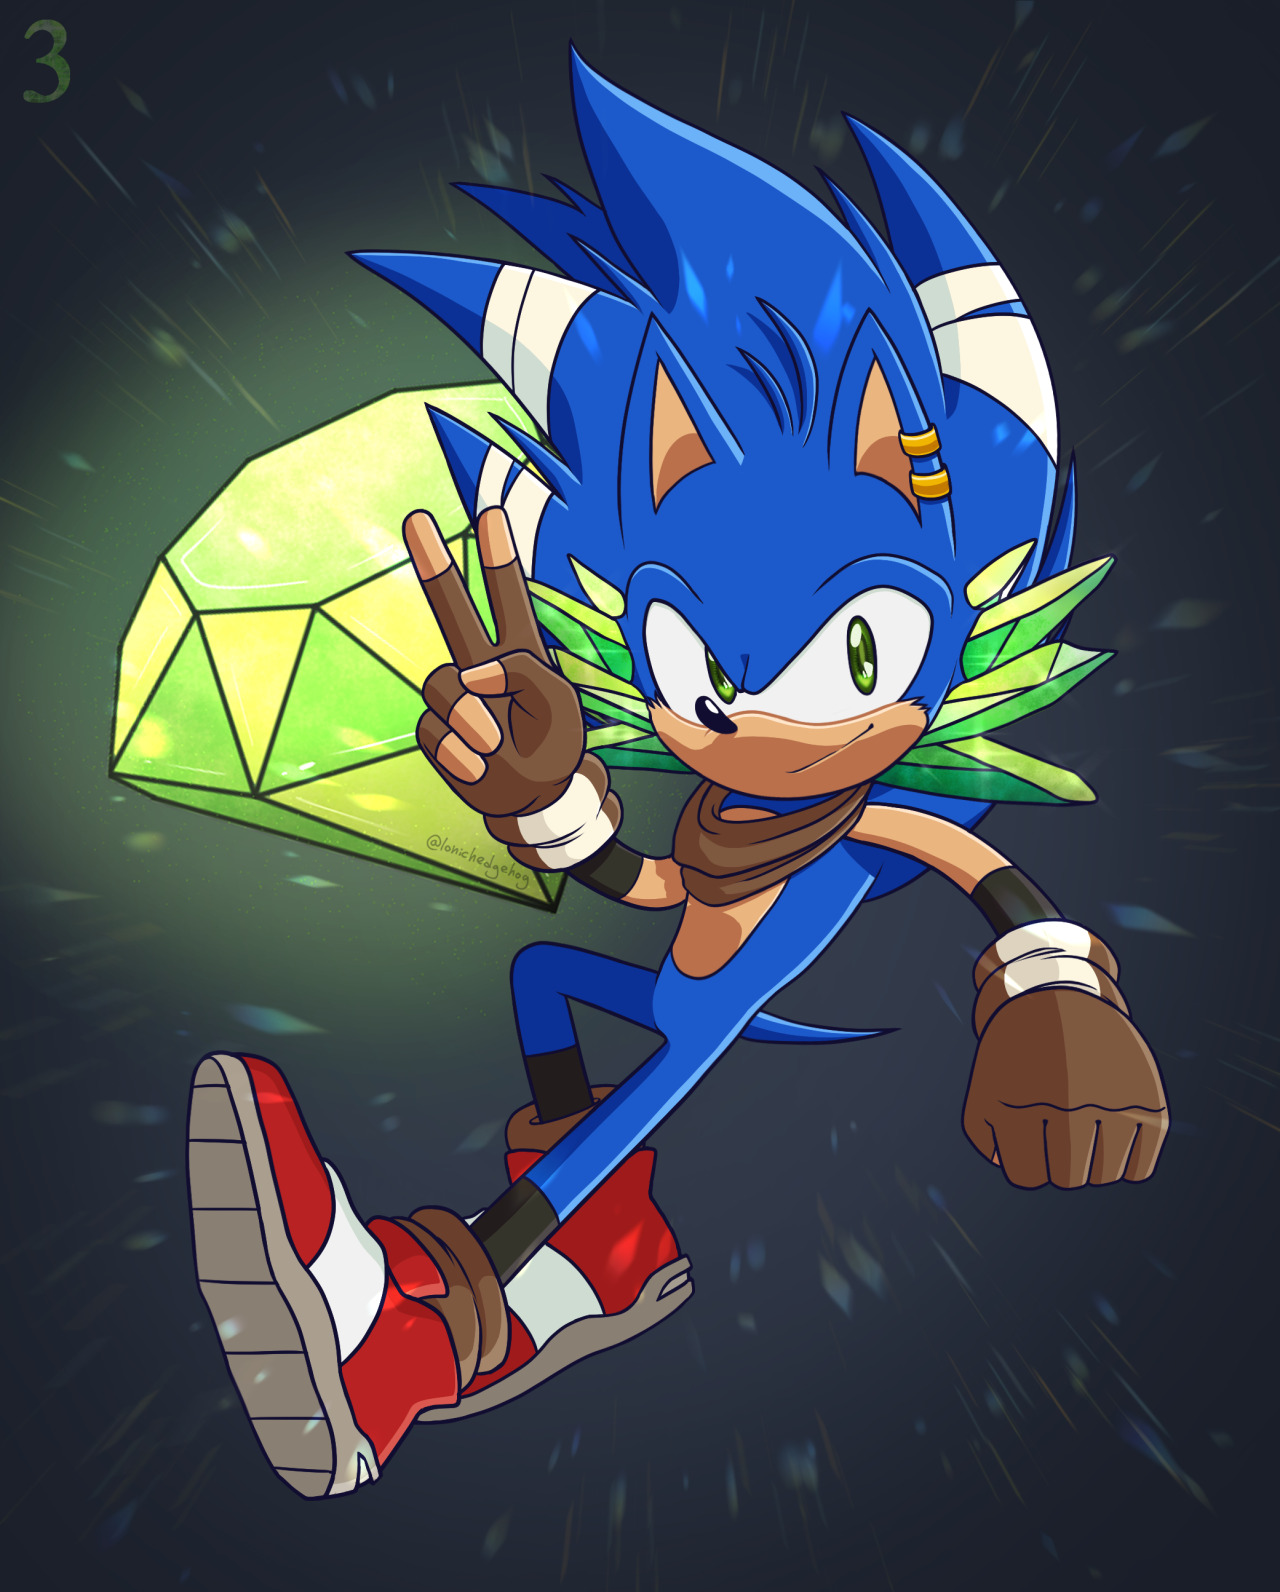 31 Days of Sonic - Day 3: What IfWhat if Sonic was the protector of the Master Emerald? feat. my AU Sonic that is kinda based on that idea (:  This is part of a month-long art challenge on Twitter, check out the hashtag over there to see more art by the community! :DHope y’all like it~-Reblogs are greatly appreciated! #my art#sonic au #master of chaos #sthmoc#sonic #sonic the hedgehog  #31 days of sonic  #sonic alternate universe #fan art#fanart#art#digital art#illustration #sonic the hedgehog fanart